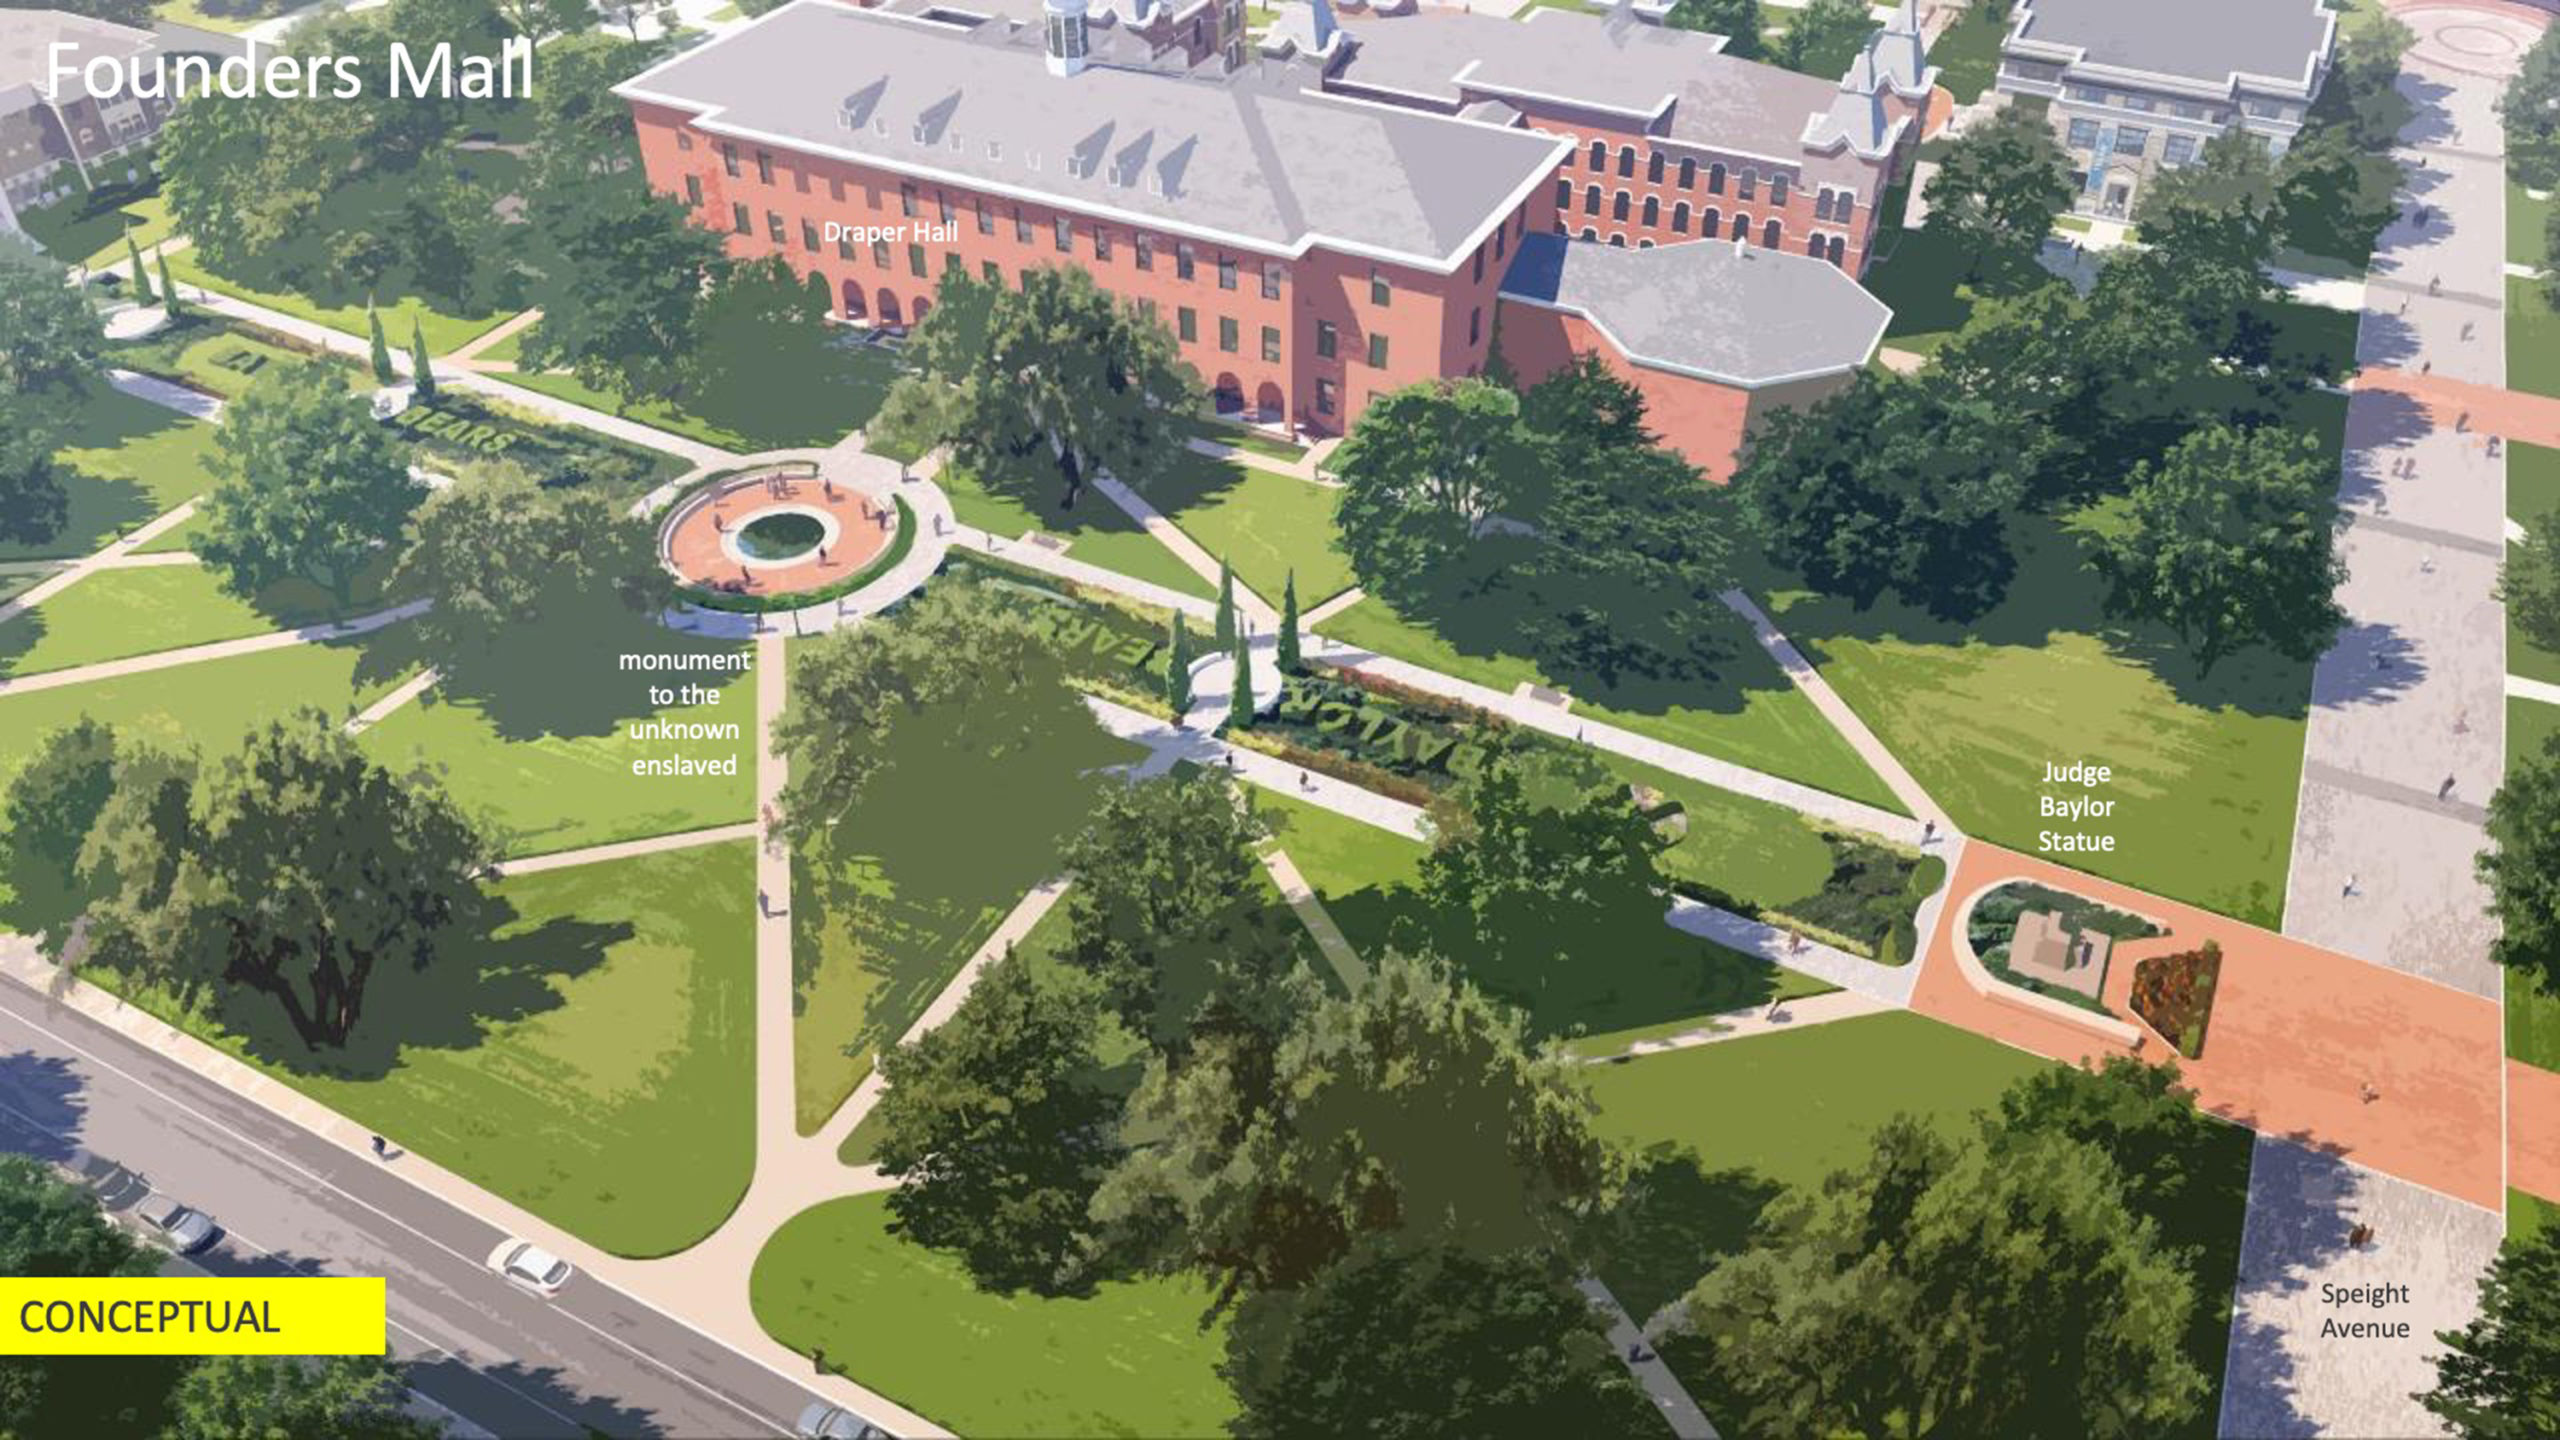 Conceptual rendering of updates planned for Founders Mall